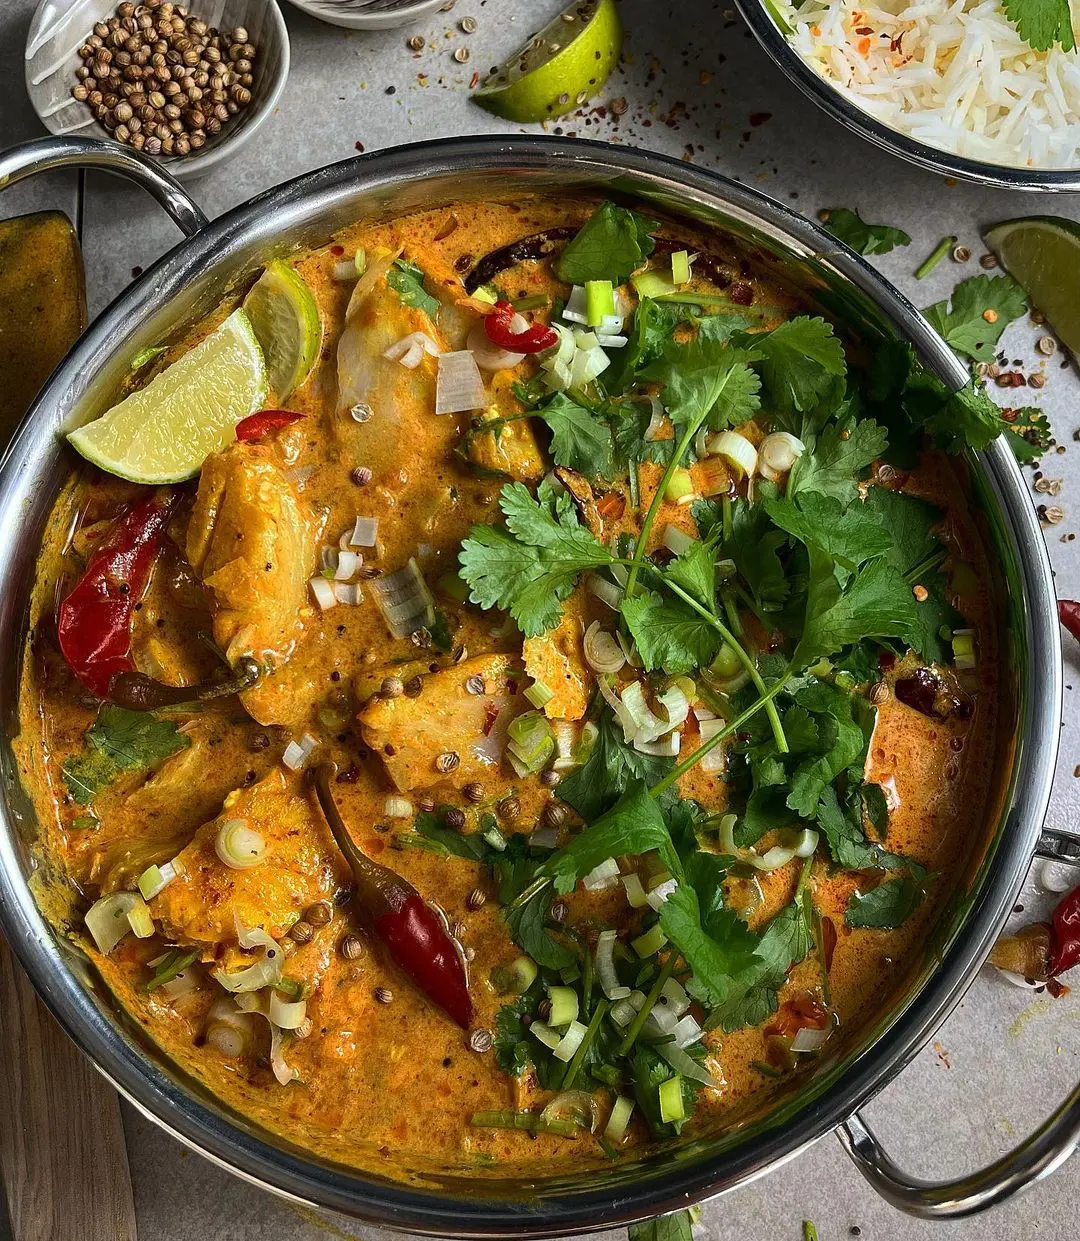 Goan Fish curry is a staple of Goa and usually every family has a specific recipe modified for them